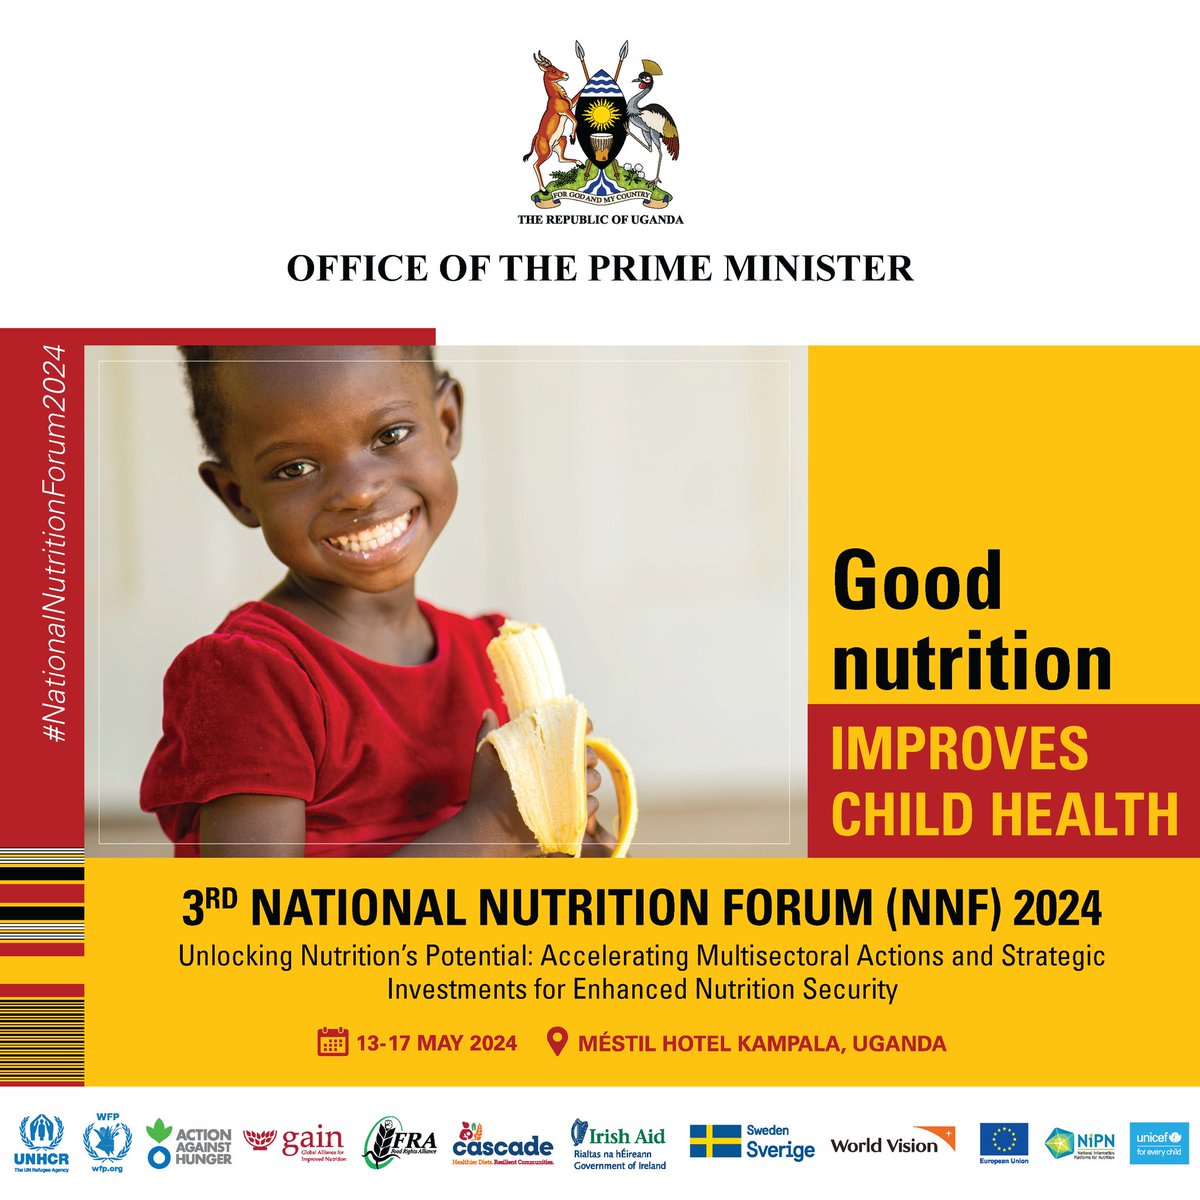 It's a count down to the 3rd National Nutrition Forum 2024! 🗓️ 13-17 May 2024 📍Mestil Hotel Kampala Theme: 'Unlocking Nutrition's Potential; Accelerating Multi-sectoral Actions and Strategic Investments for Enhanced Nutrition security'. #NNF24 #InvestInUgChildren